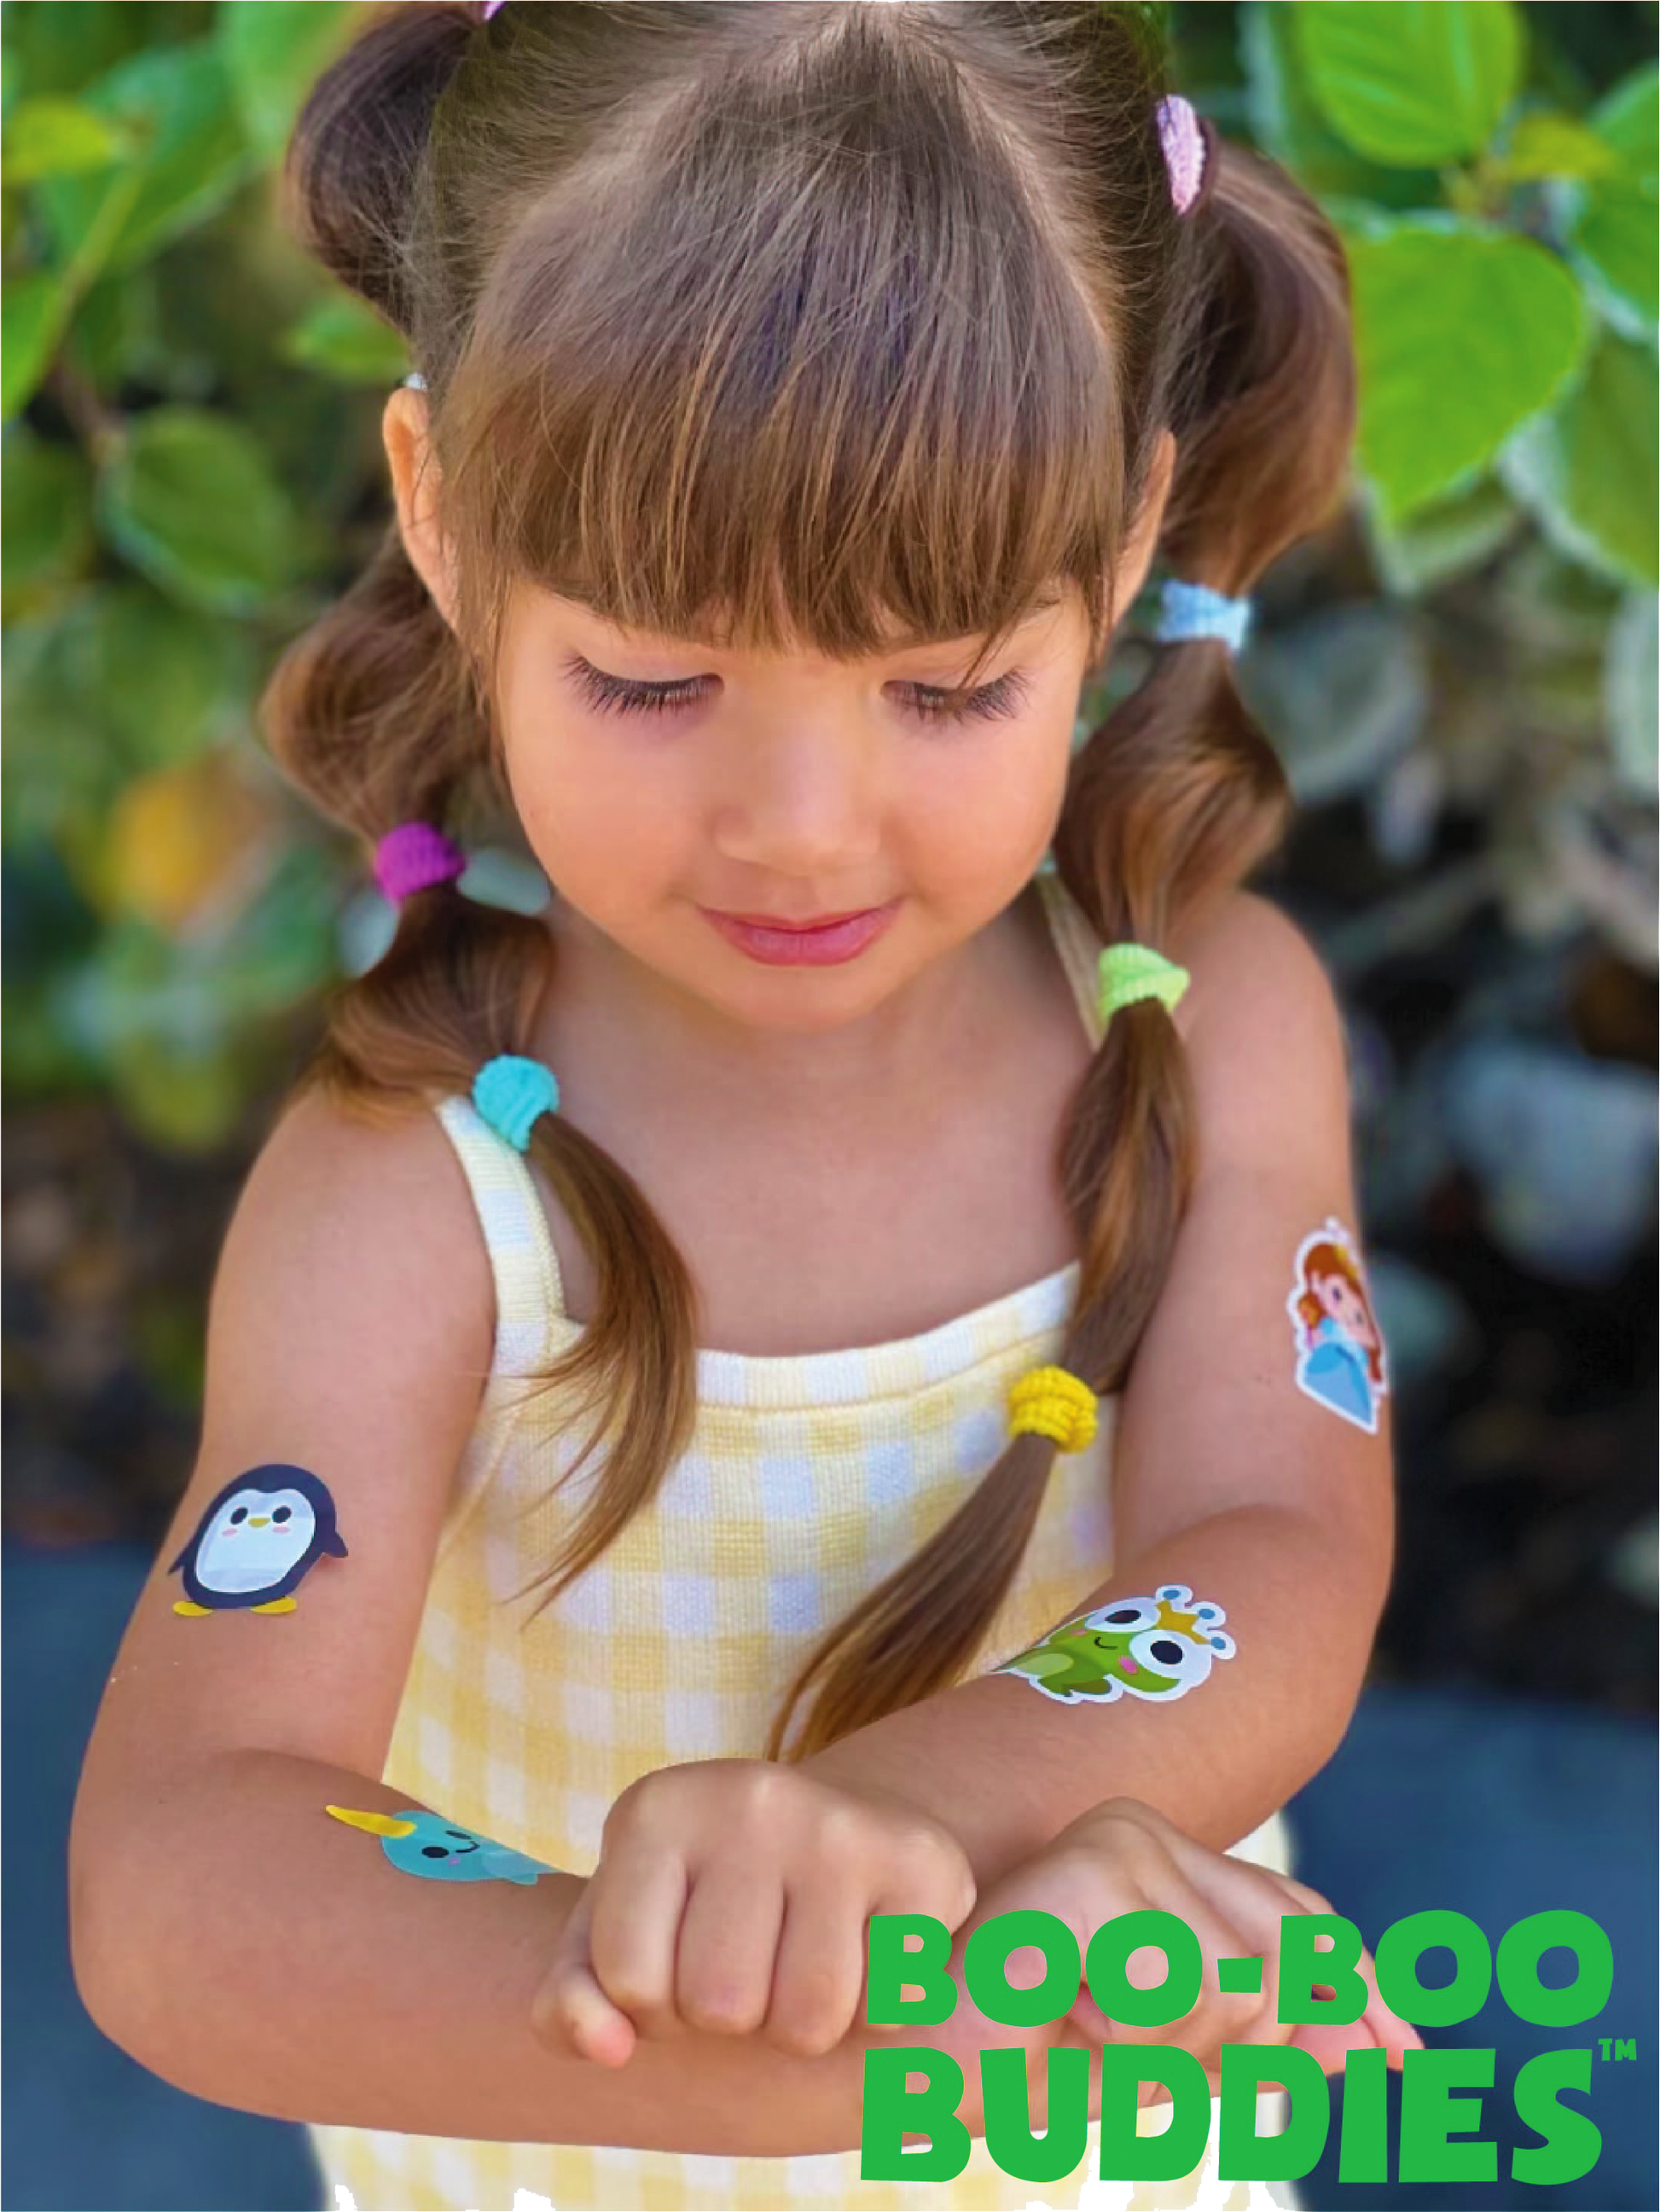 Girl wearing multiple Boo Boo Buddies Bandages